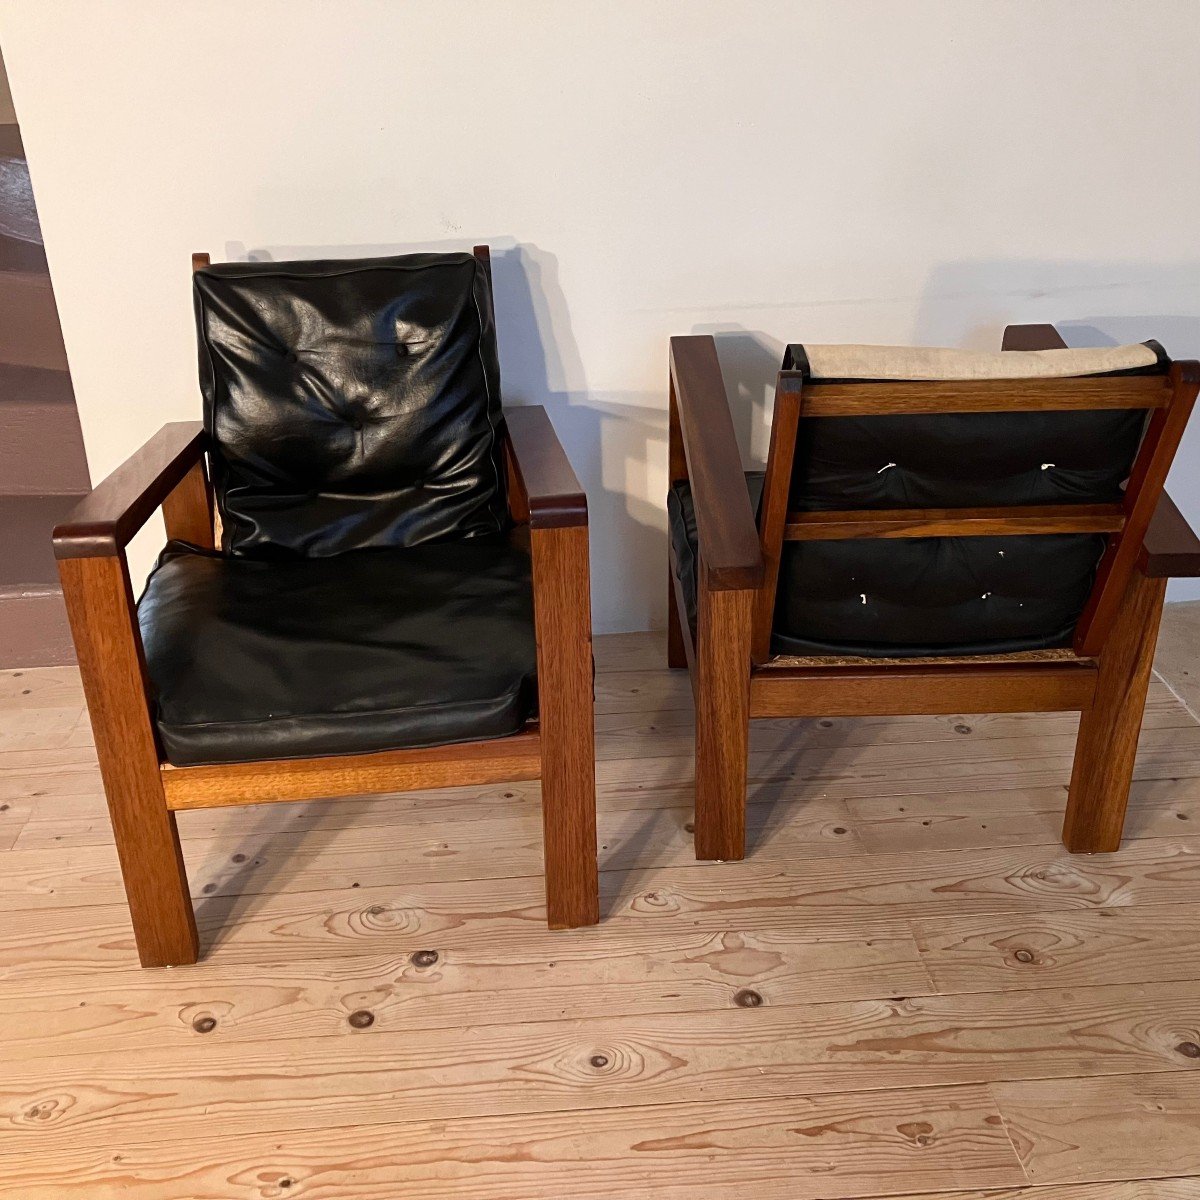 Pair Of Armchairs From The 1940s-1950s In Mahogany Or Teak.-photo-1